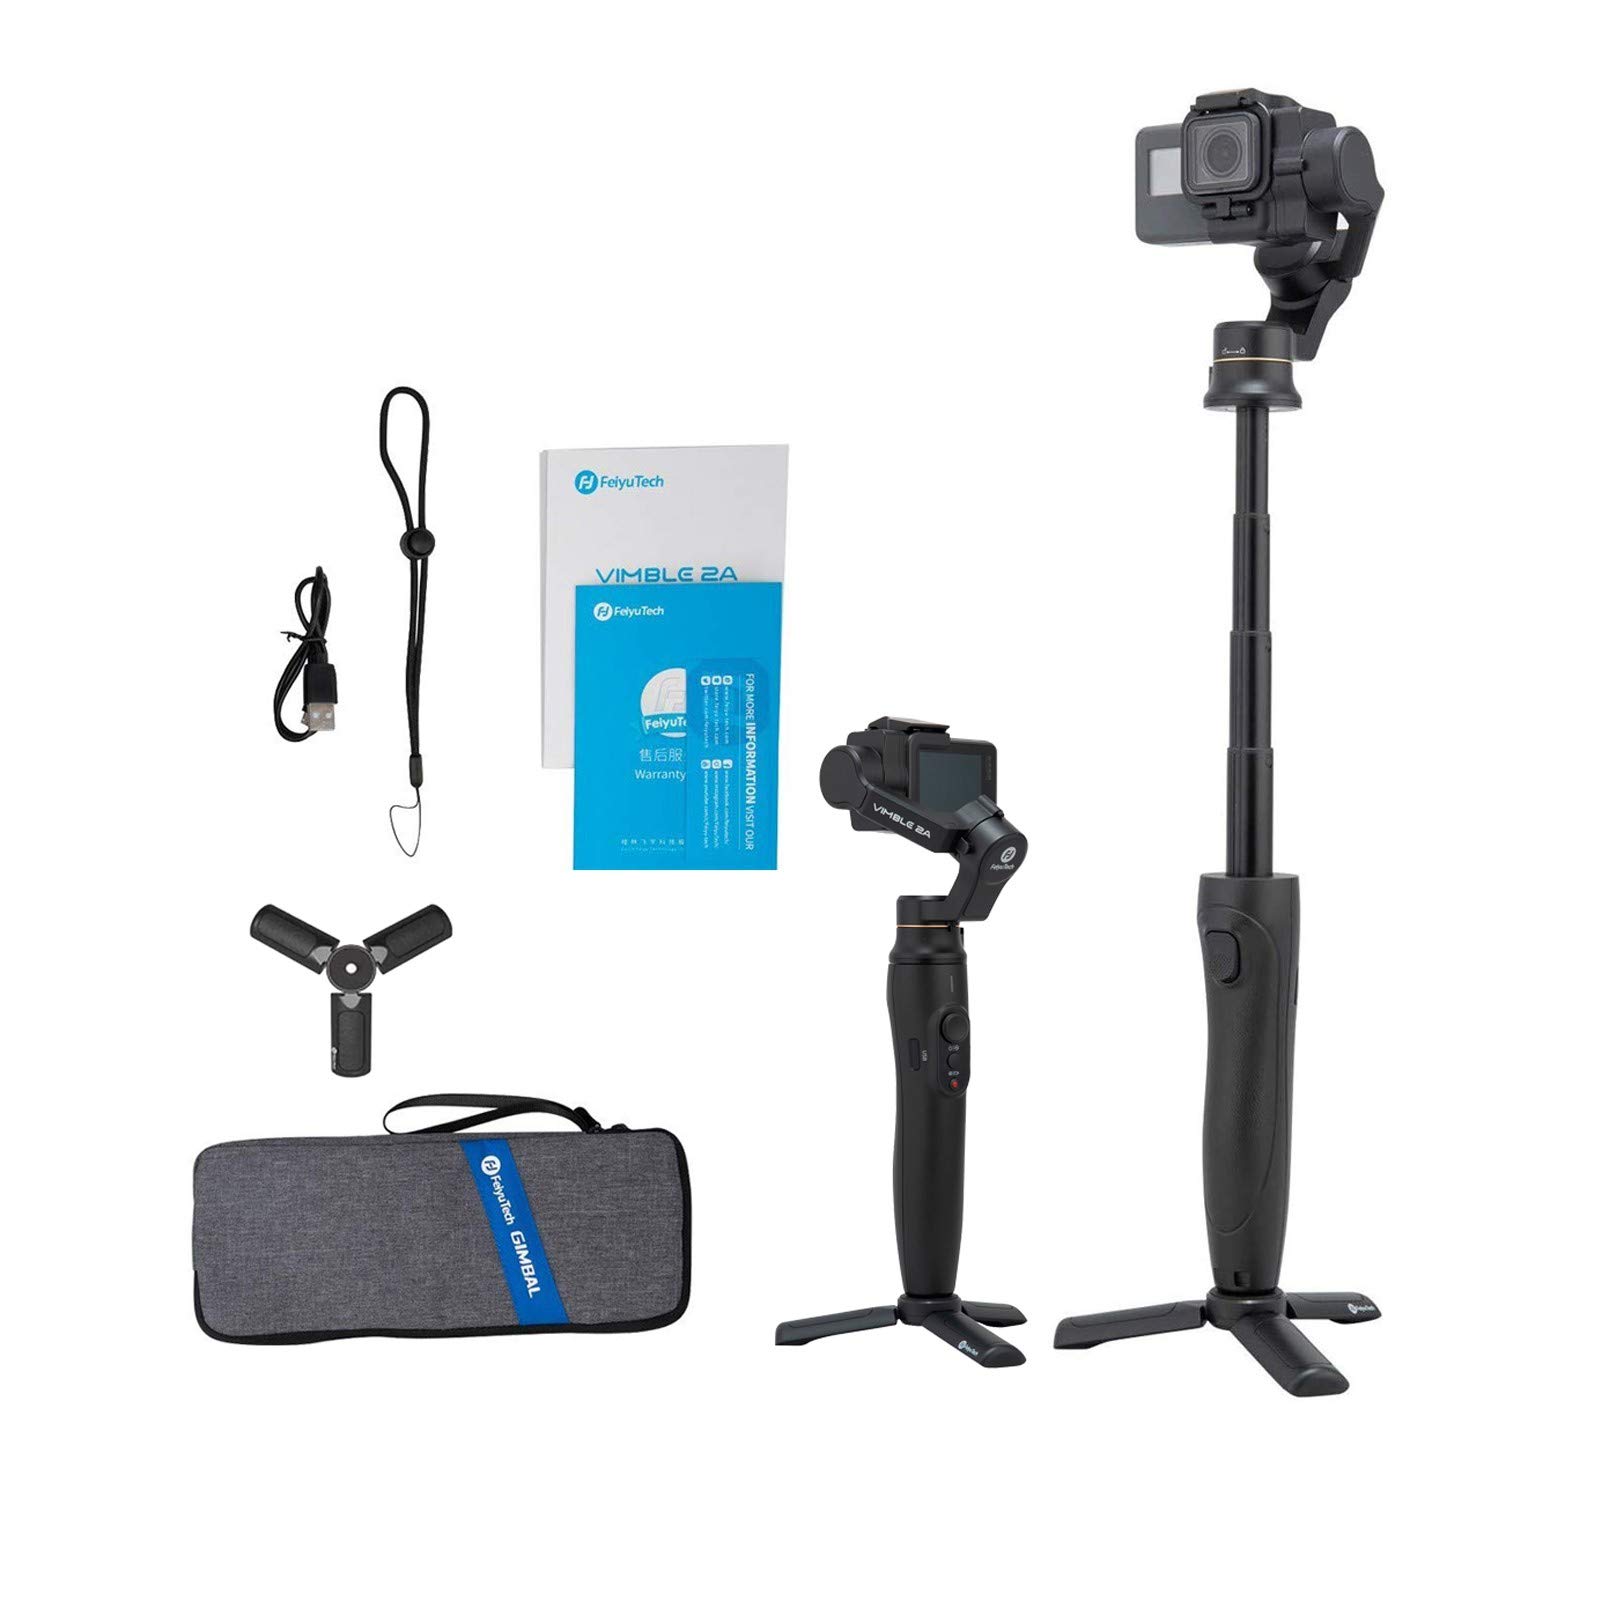 FeiyuTech Vimble 2A Selfie Stick 3- Axis Handheld Gimbal Stabilizer for GoPro Hero 8/7/6/5 Action Camera